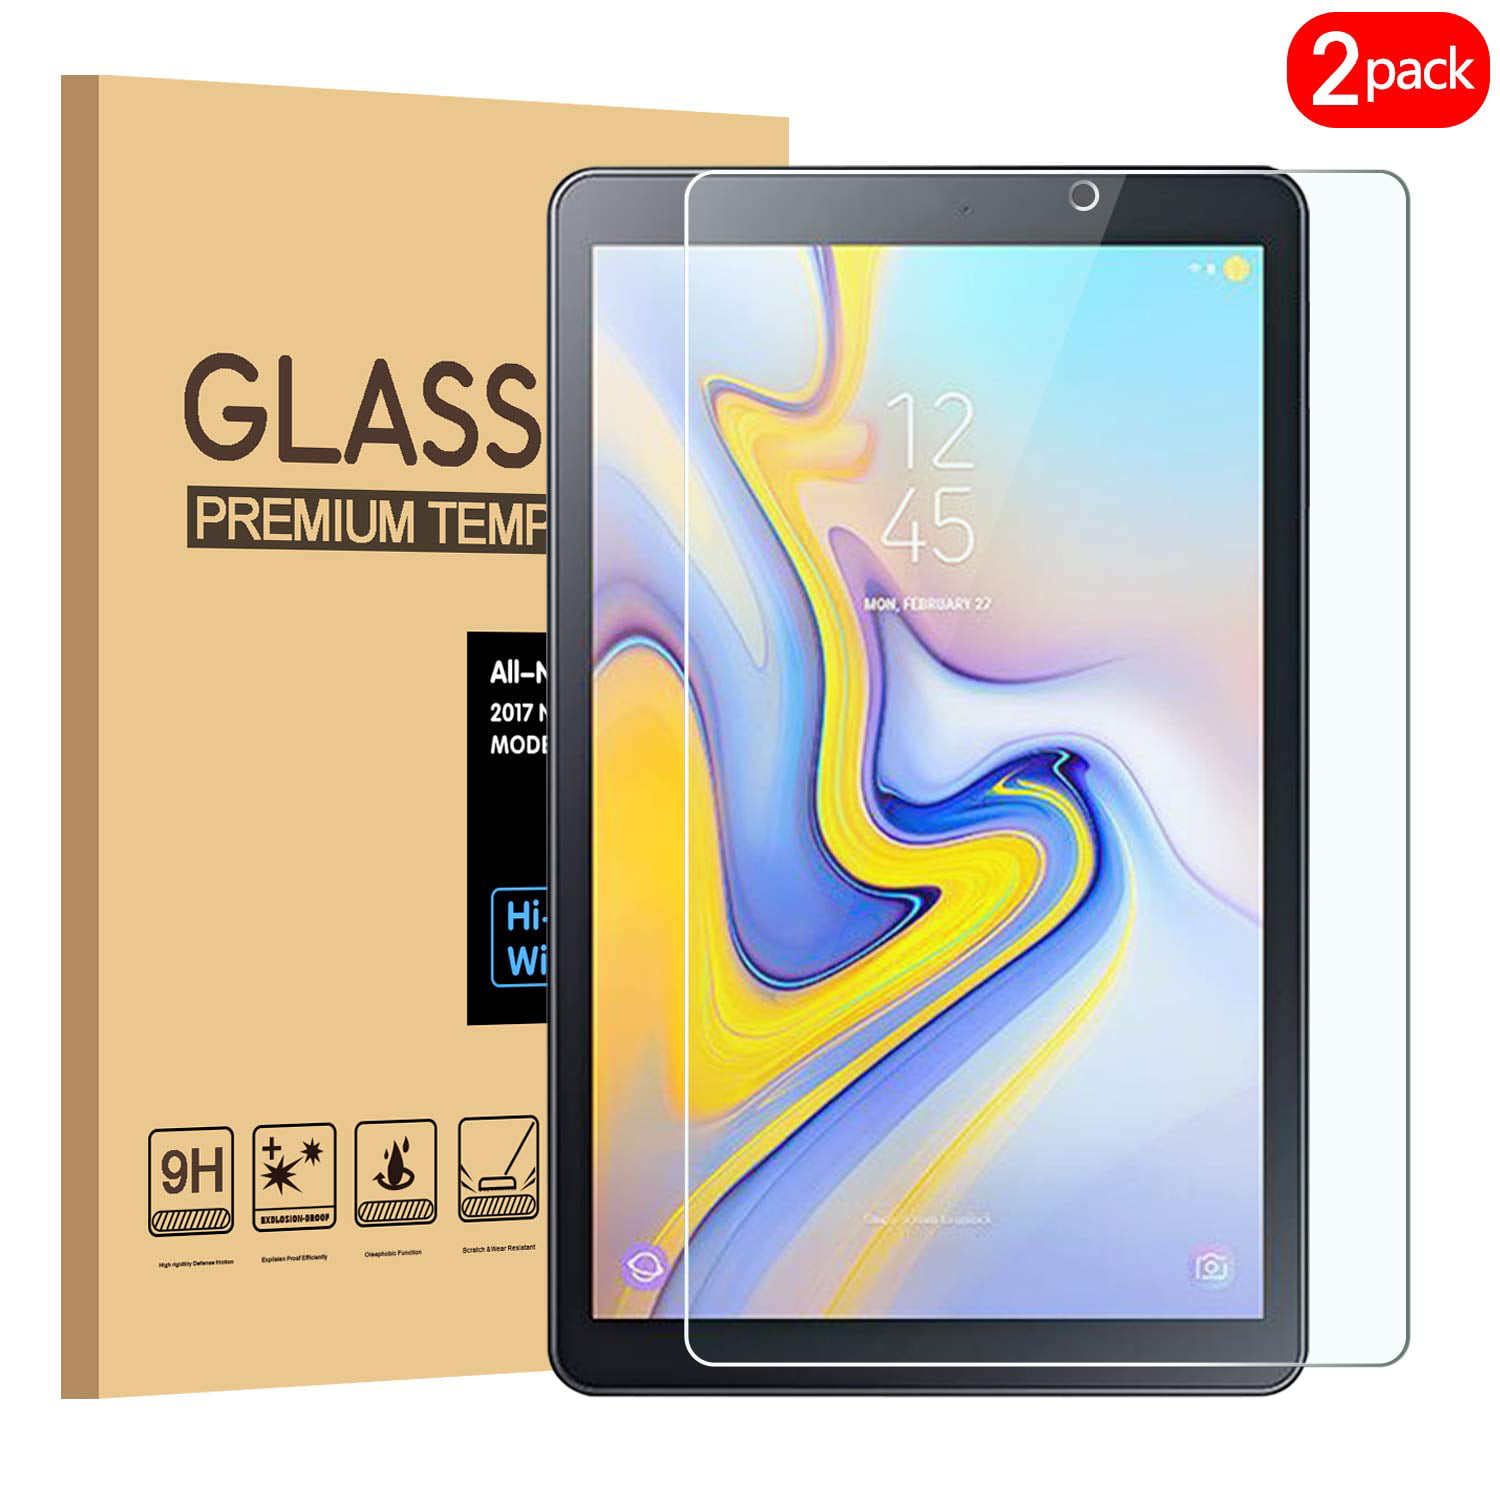 Samsung Galaxy Tab A 8.0" SM-T387 2018 Tempered Glass Screen Protector 3-Pack 